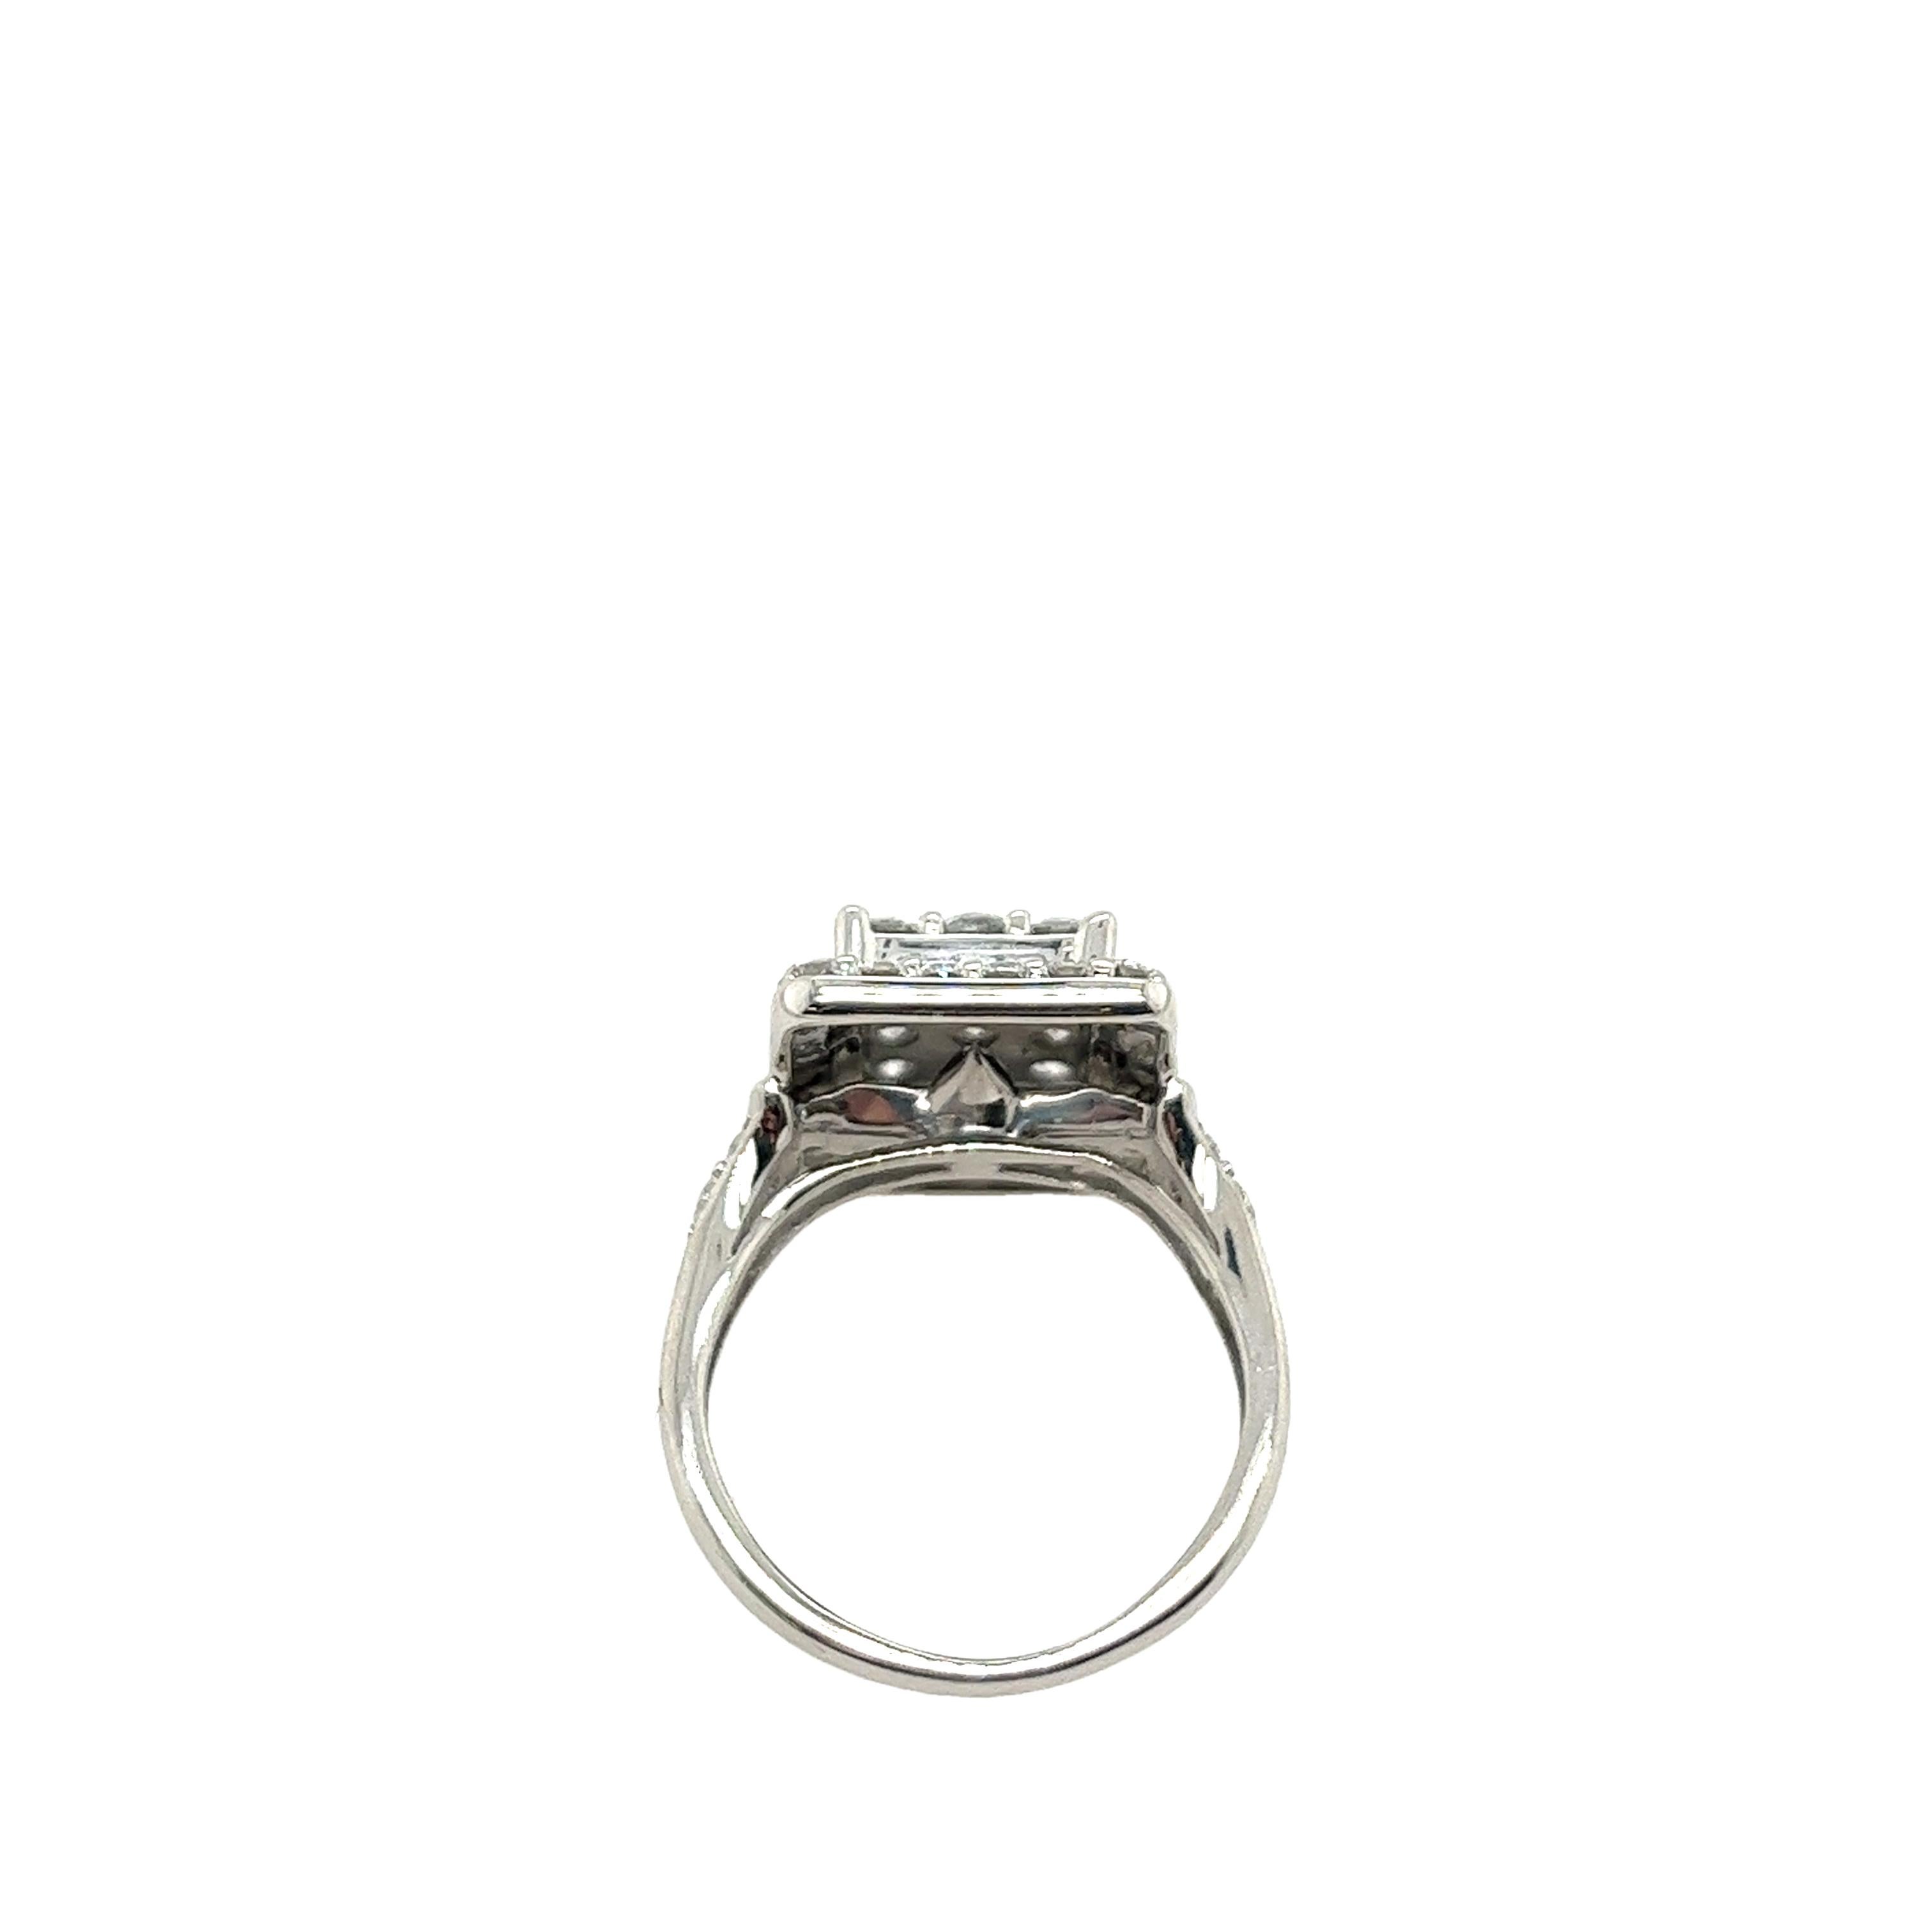 Women's 9ct White Gold 1.20ct Rectangle Shaped Diamond Ring With Diamond Set Shoulder